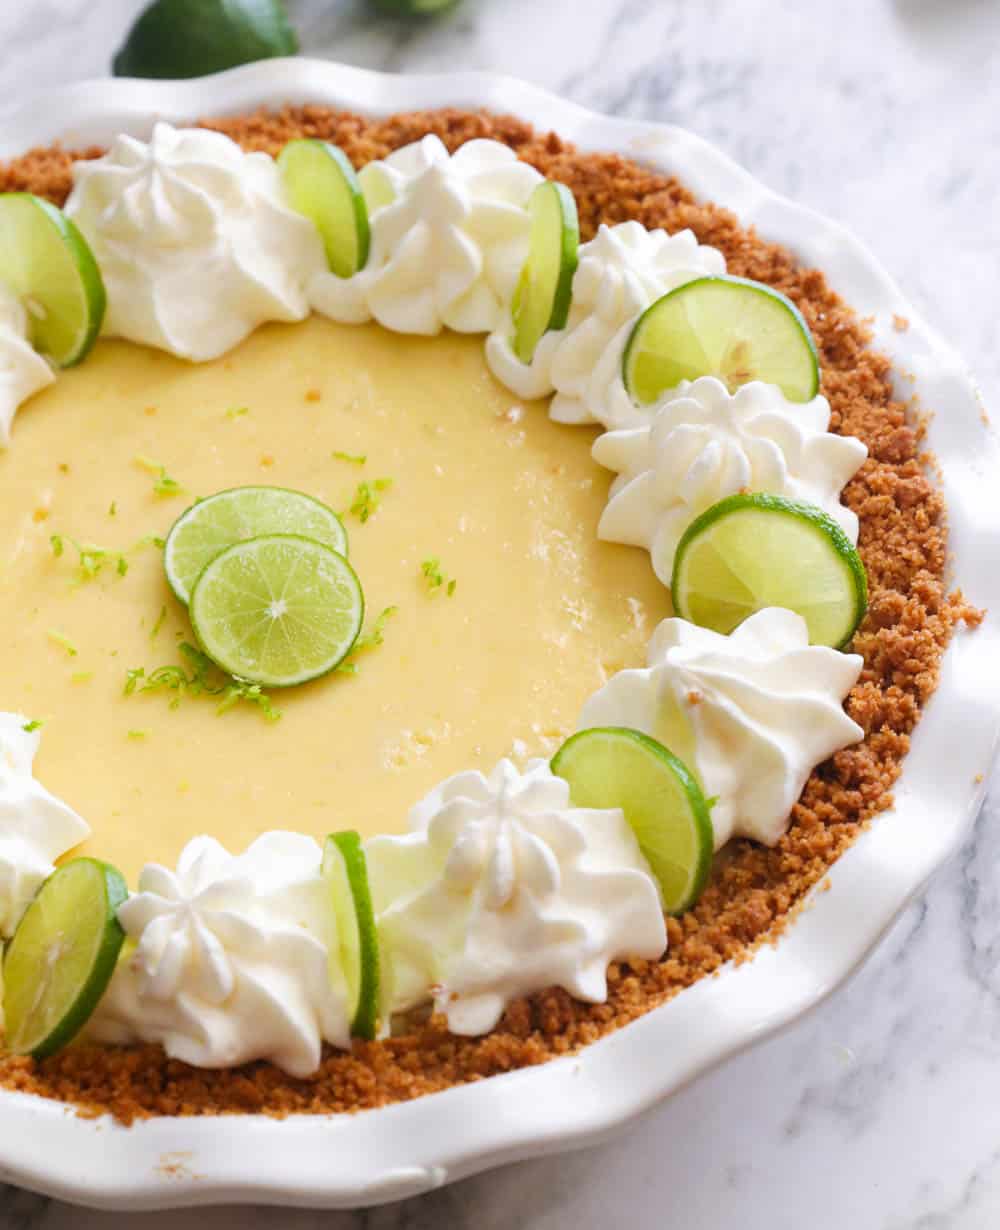 Whole Key Lime Pie with whipped cream and lime slices